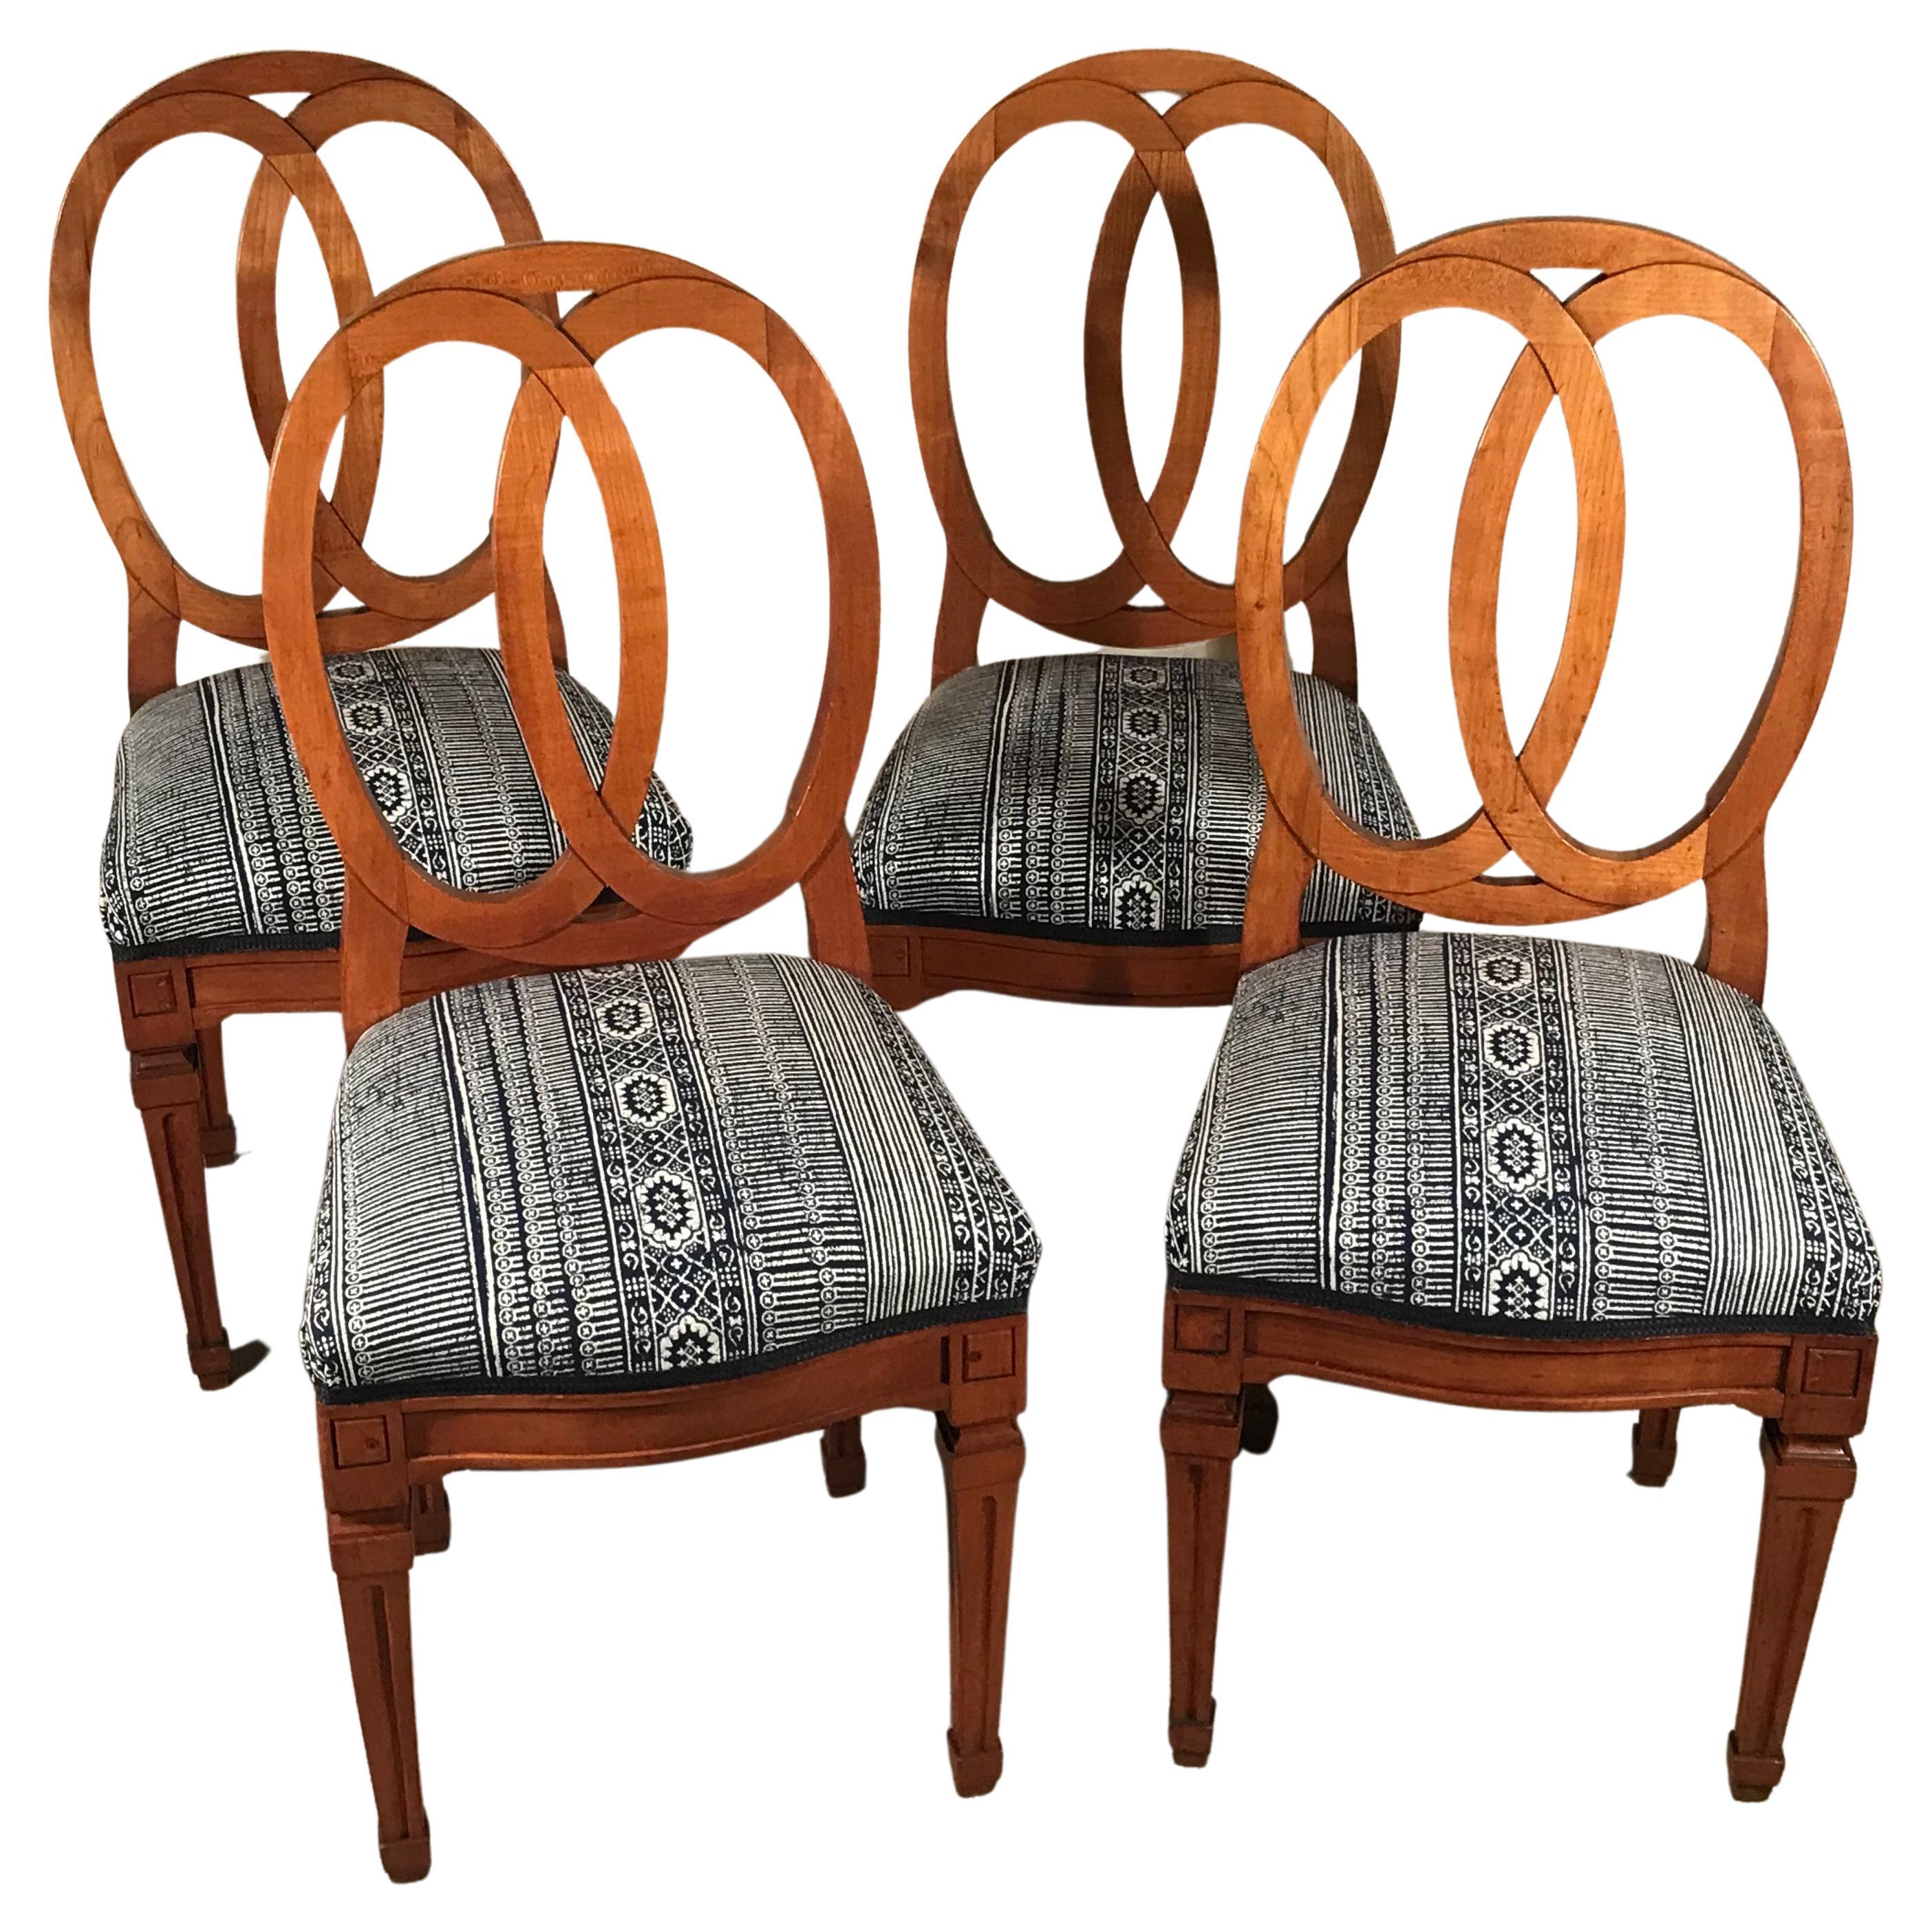 Set of Four 18th century Louis XVI Chairs, Cherry For Sale